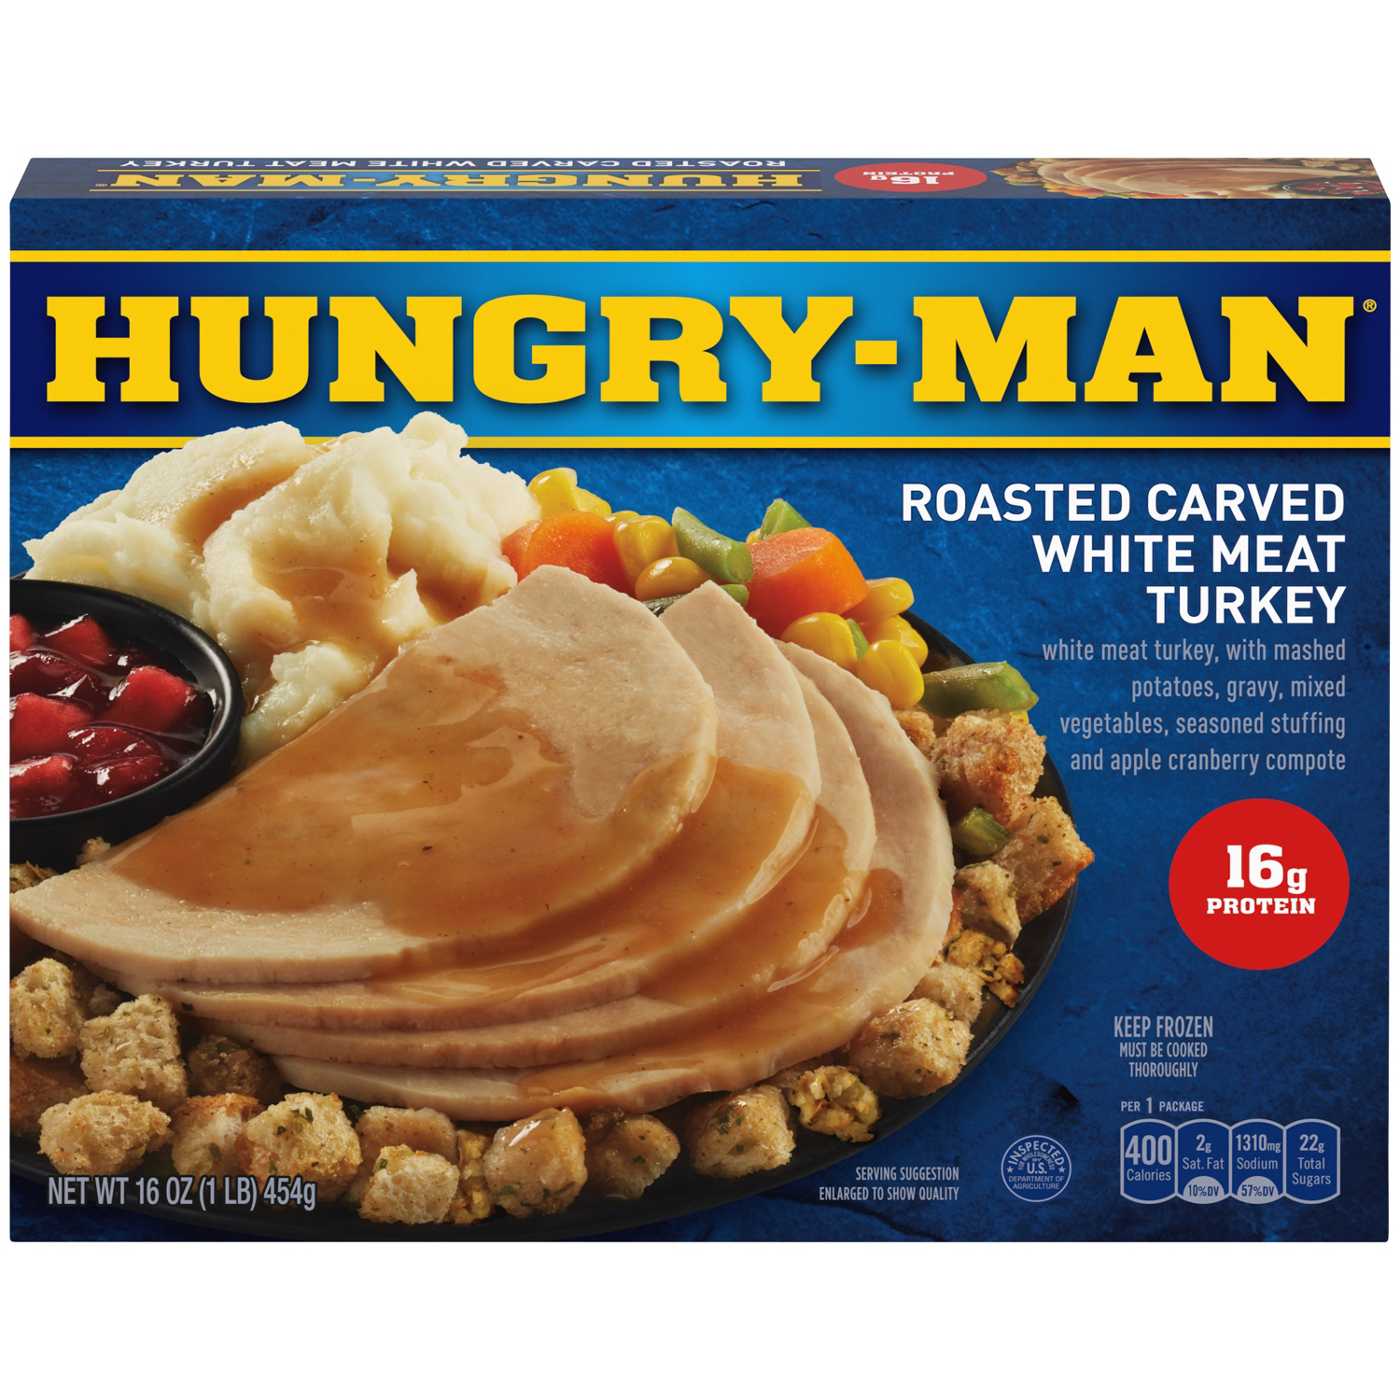 Hungry-Man Roasted Turkey Frozen Meal; image 1 of 7